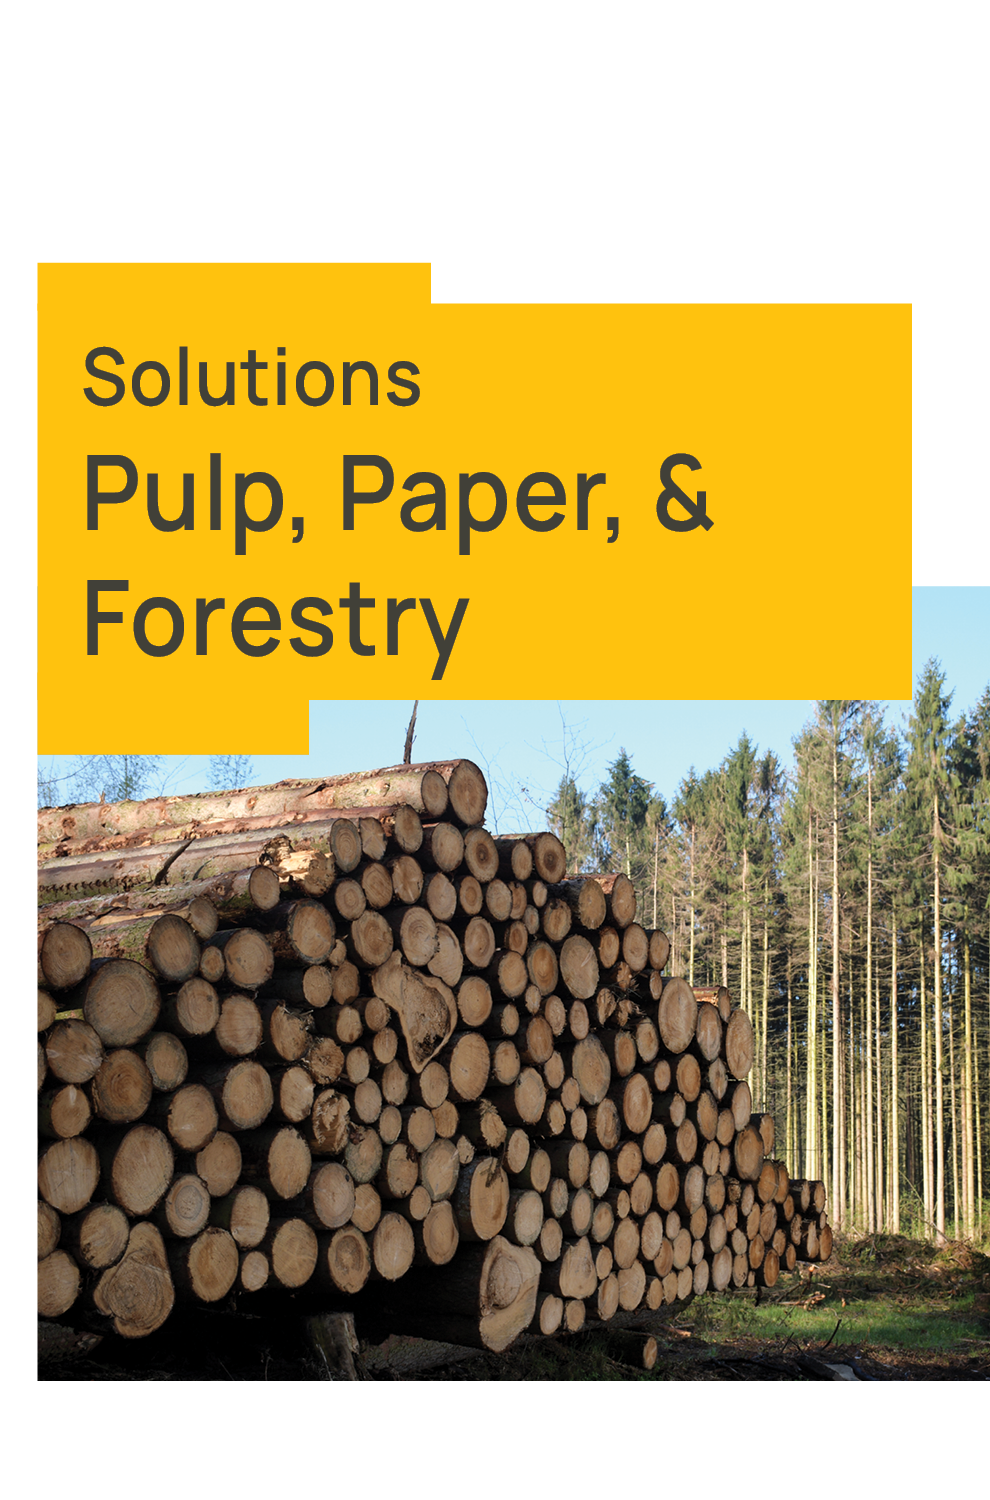 Pulp, Paper & Forestry Flyer